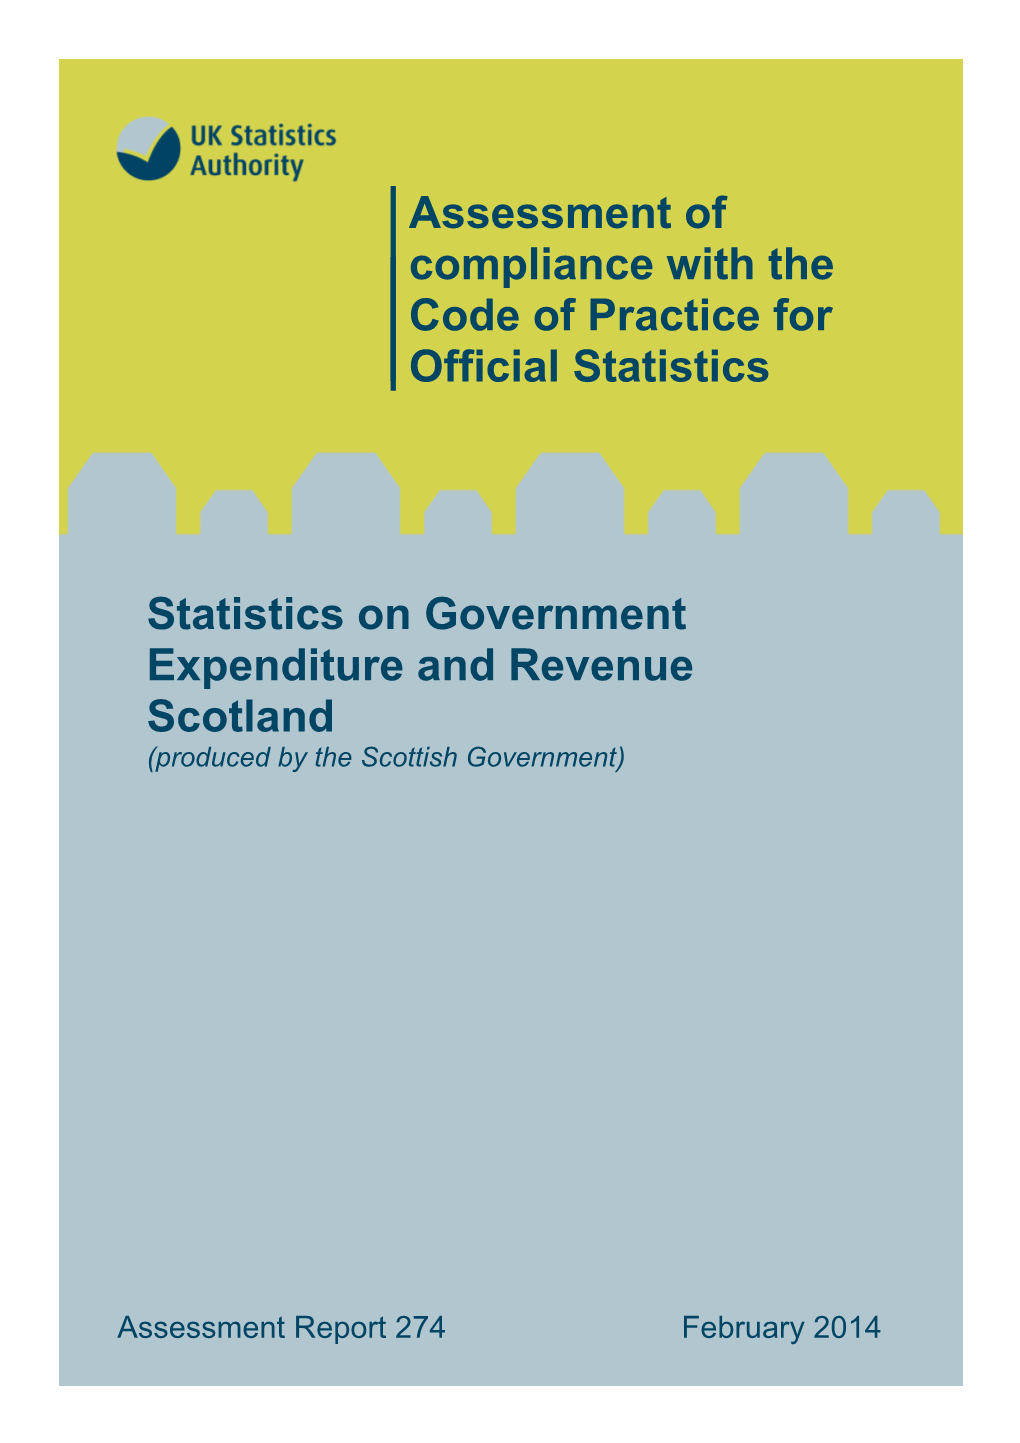 "Assessment Report 274 Statistics on Government Expenditure and Revenue Scotland" in 0.19 Format